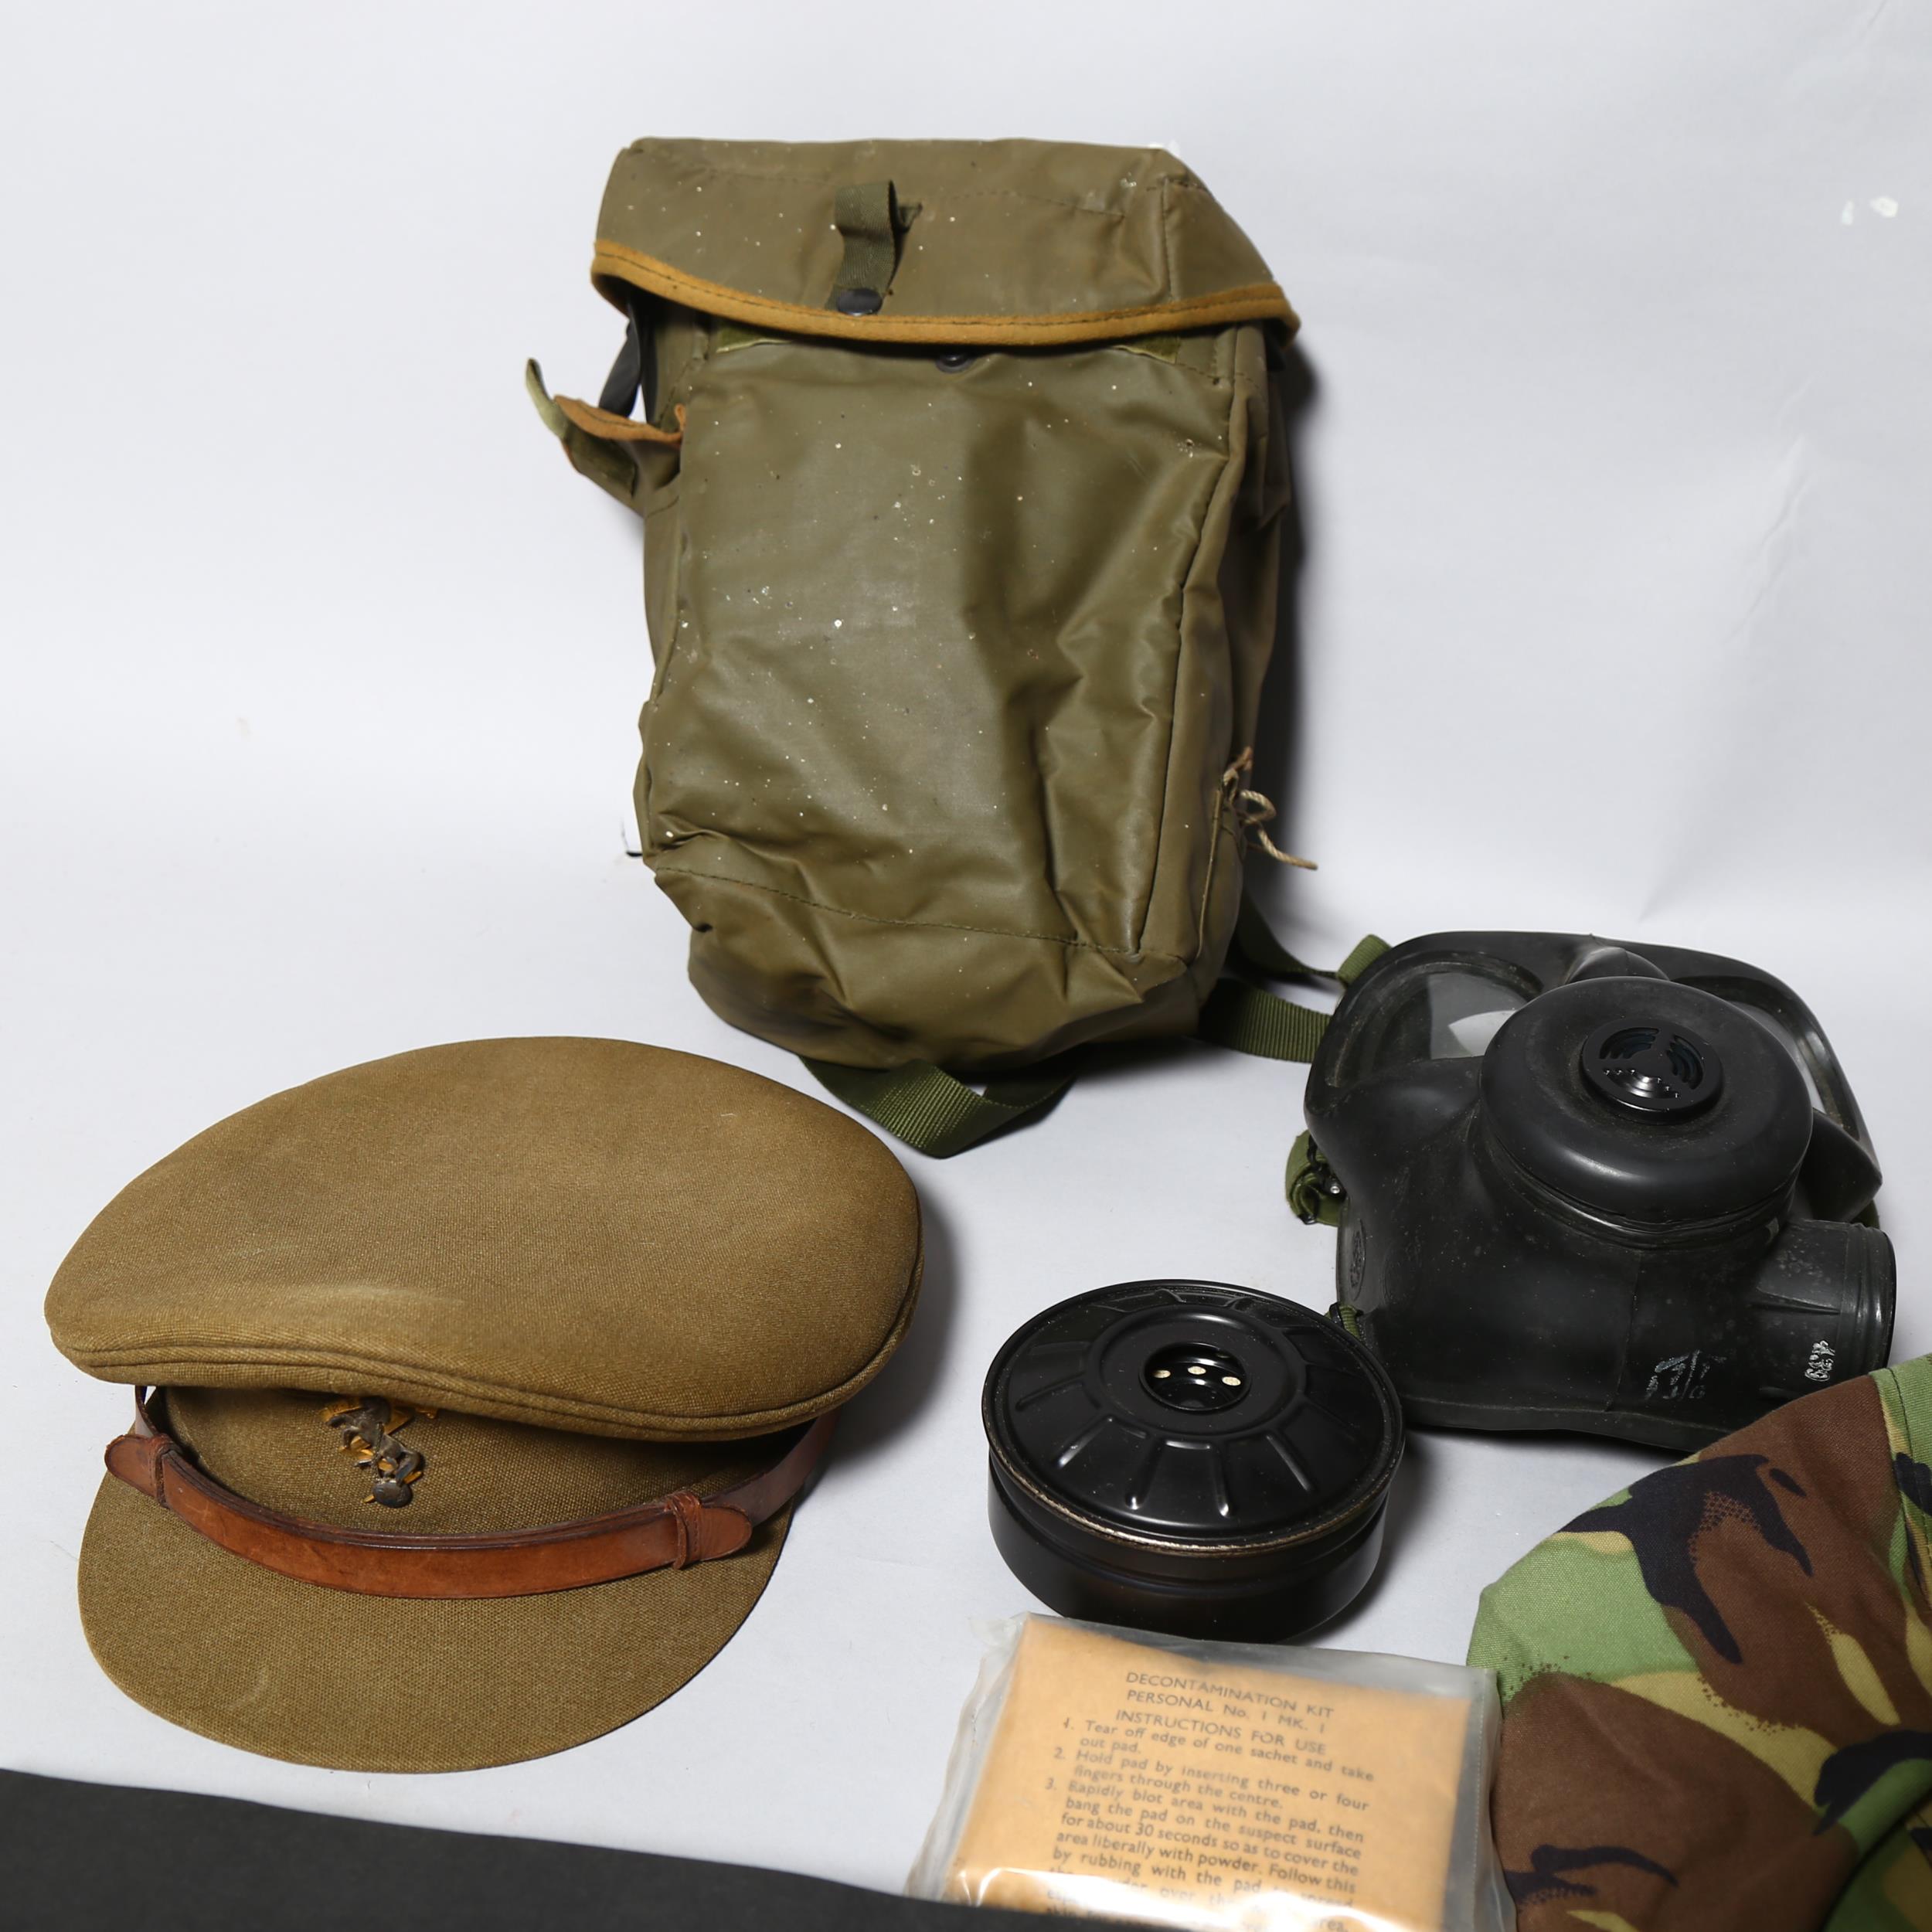 Military uniform, photograph album, camouflage belts and cap of RH Rigg, circa 1960s - Image 3 of 3